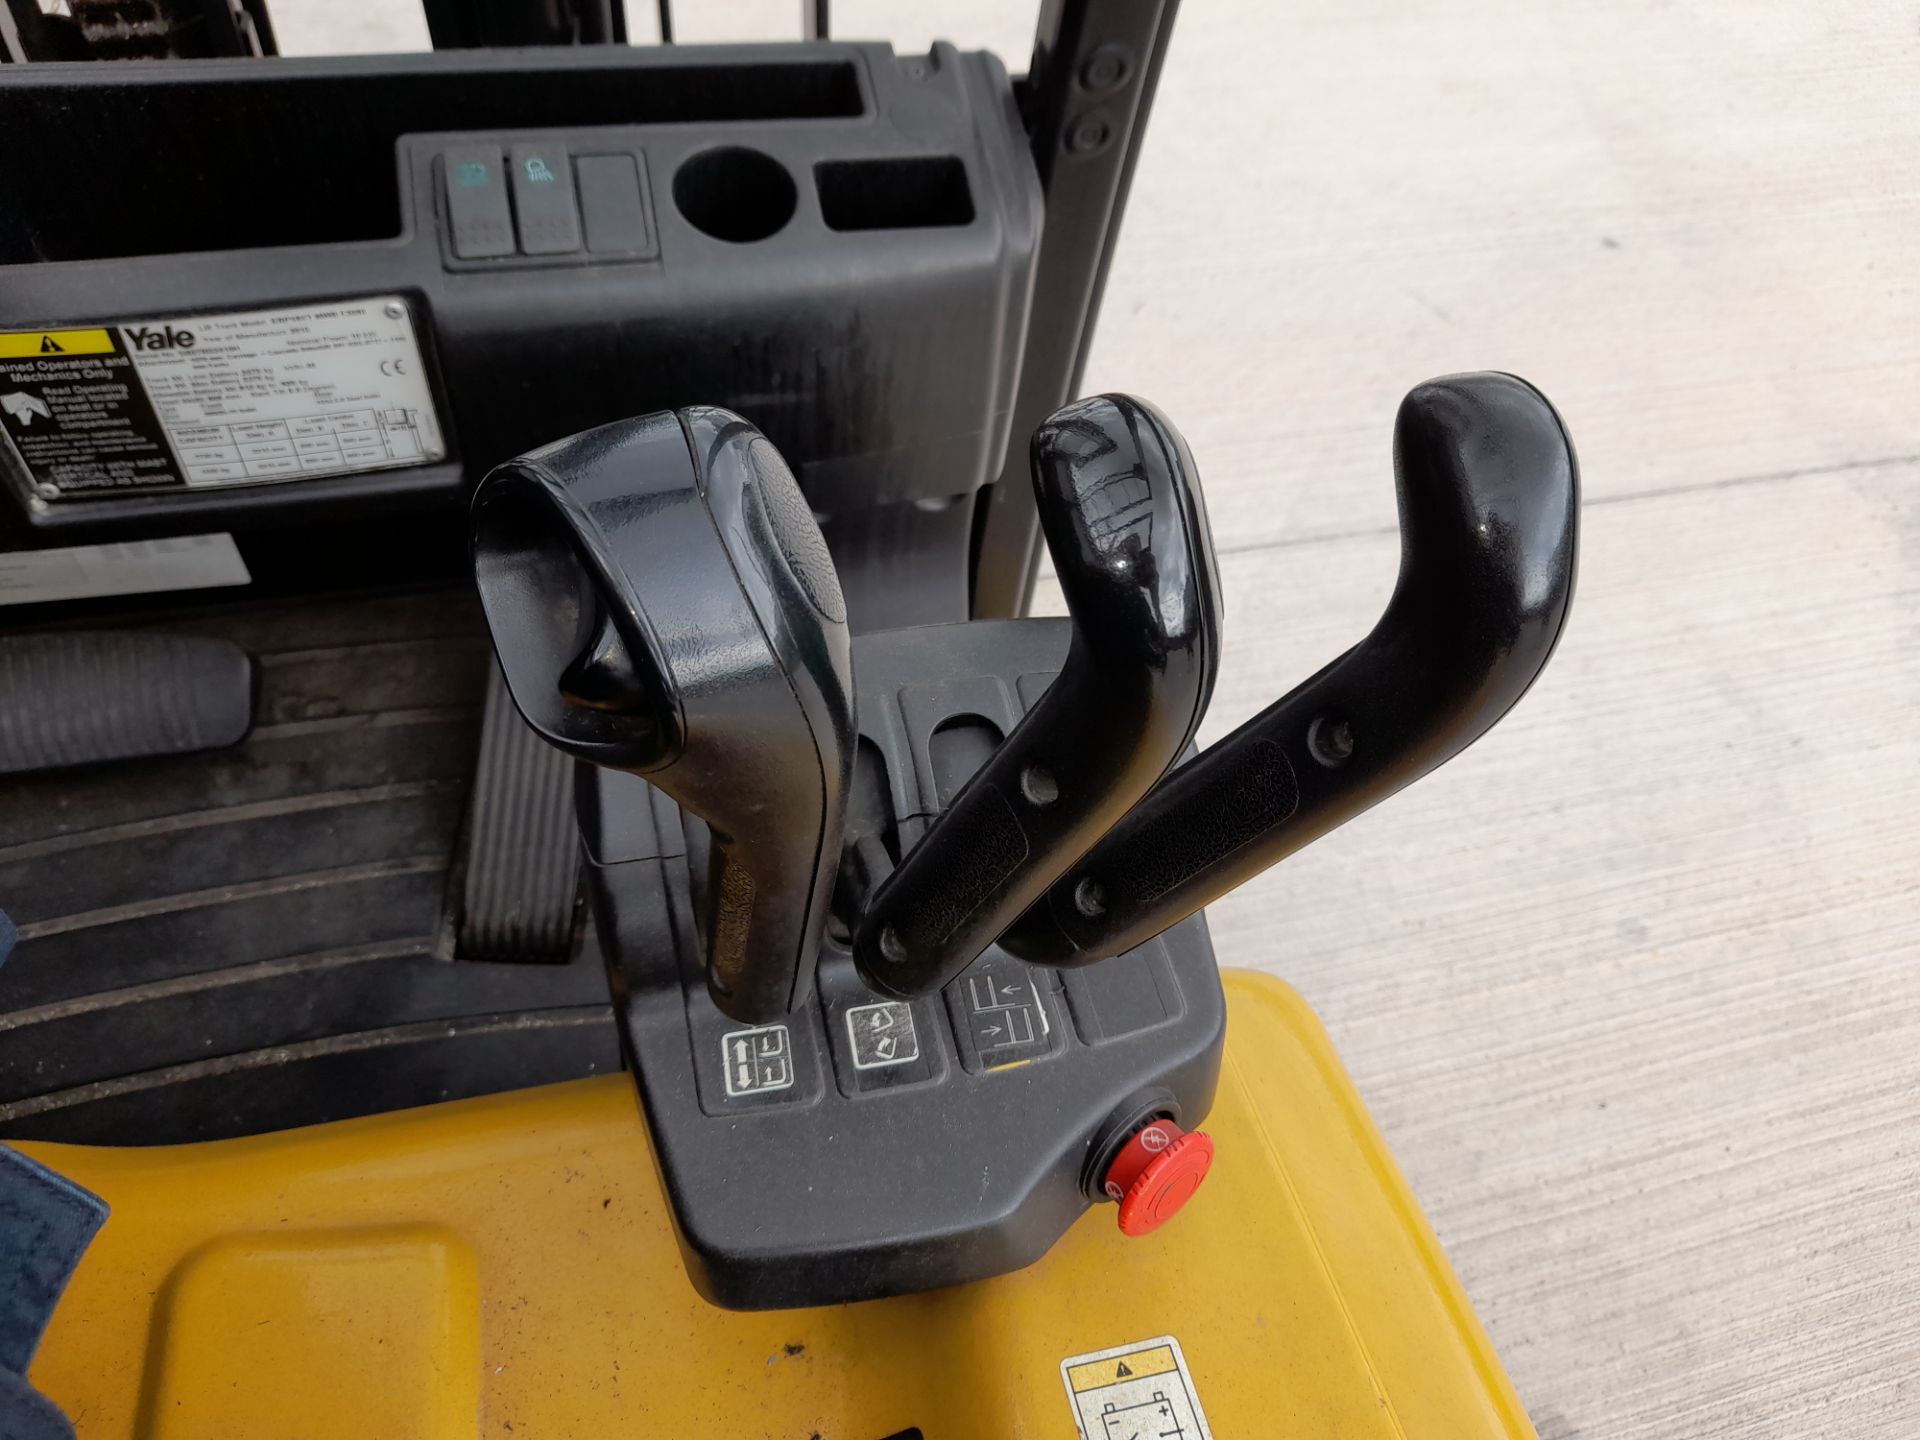 Yale ERP18VT MWBF2080 1.8tonne capacity Electric Forklift Truck, serial number G807B02410H (2010), - Image 15 of 17